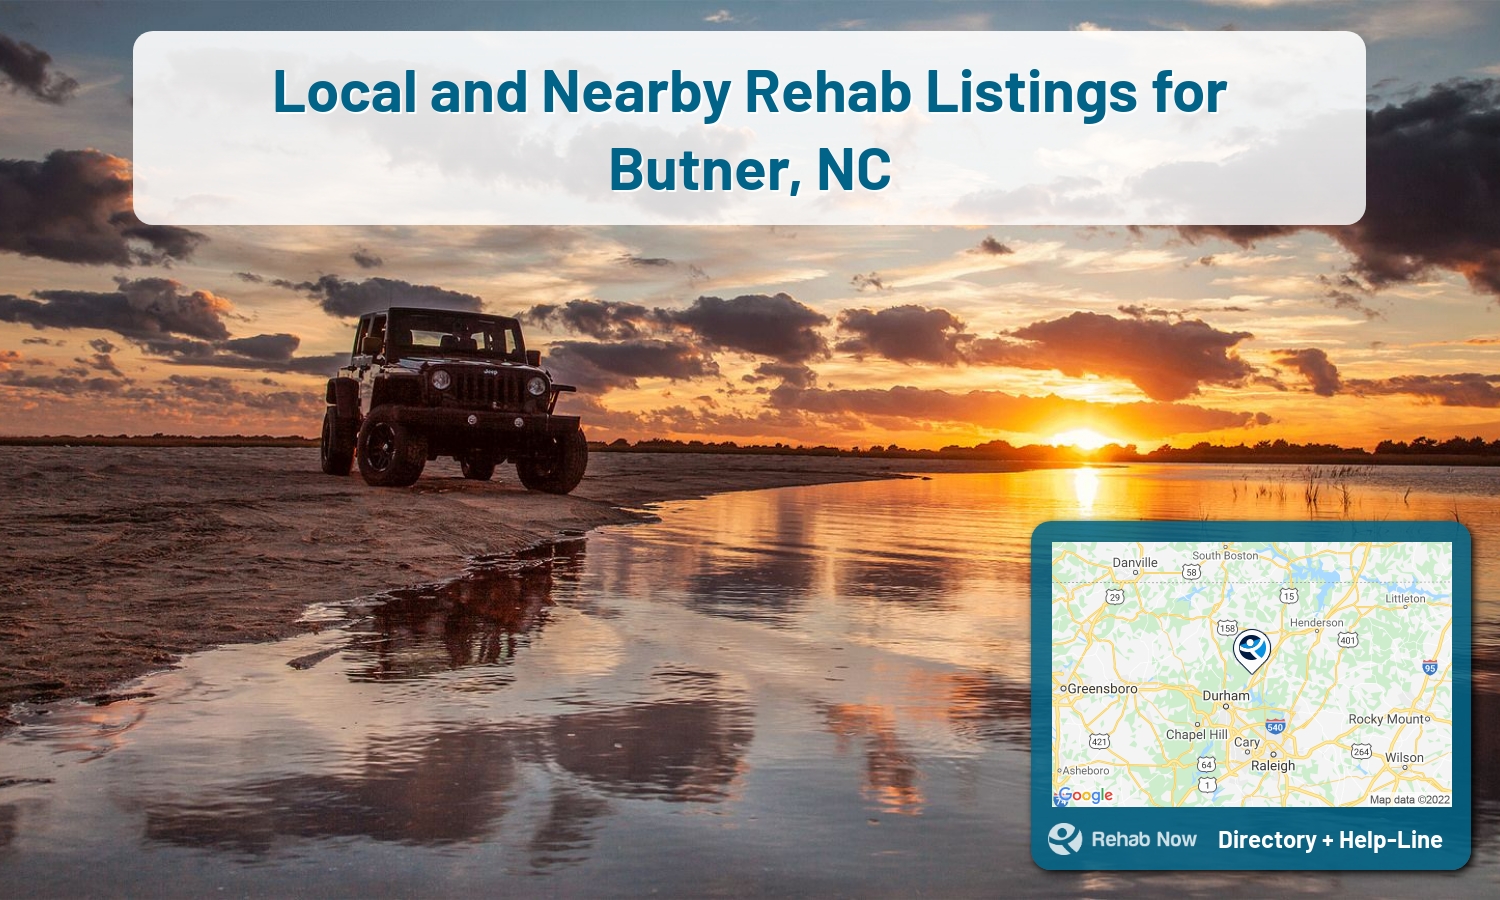 Butner, NC Treatment Centers. Find drug rehab in Butner, North Carolina, or detox and treatment programs. Get the right help now!